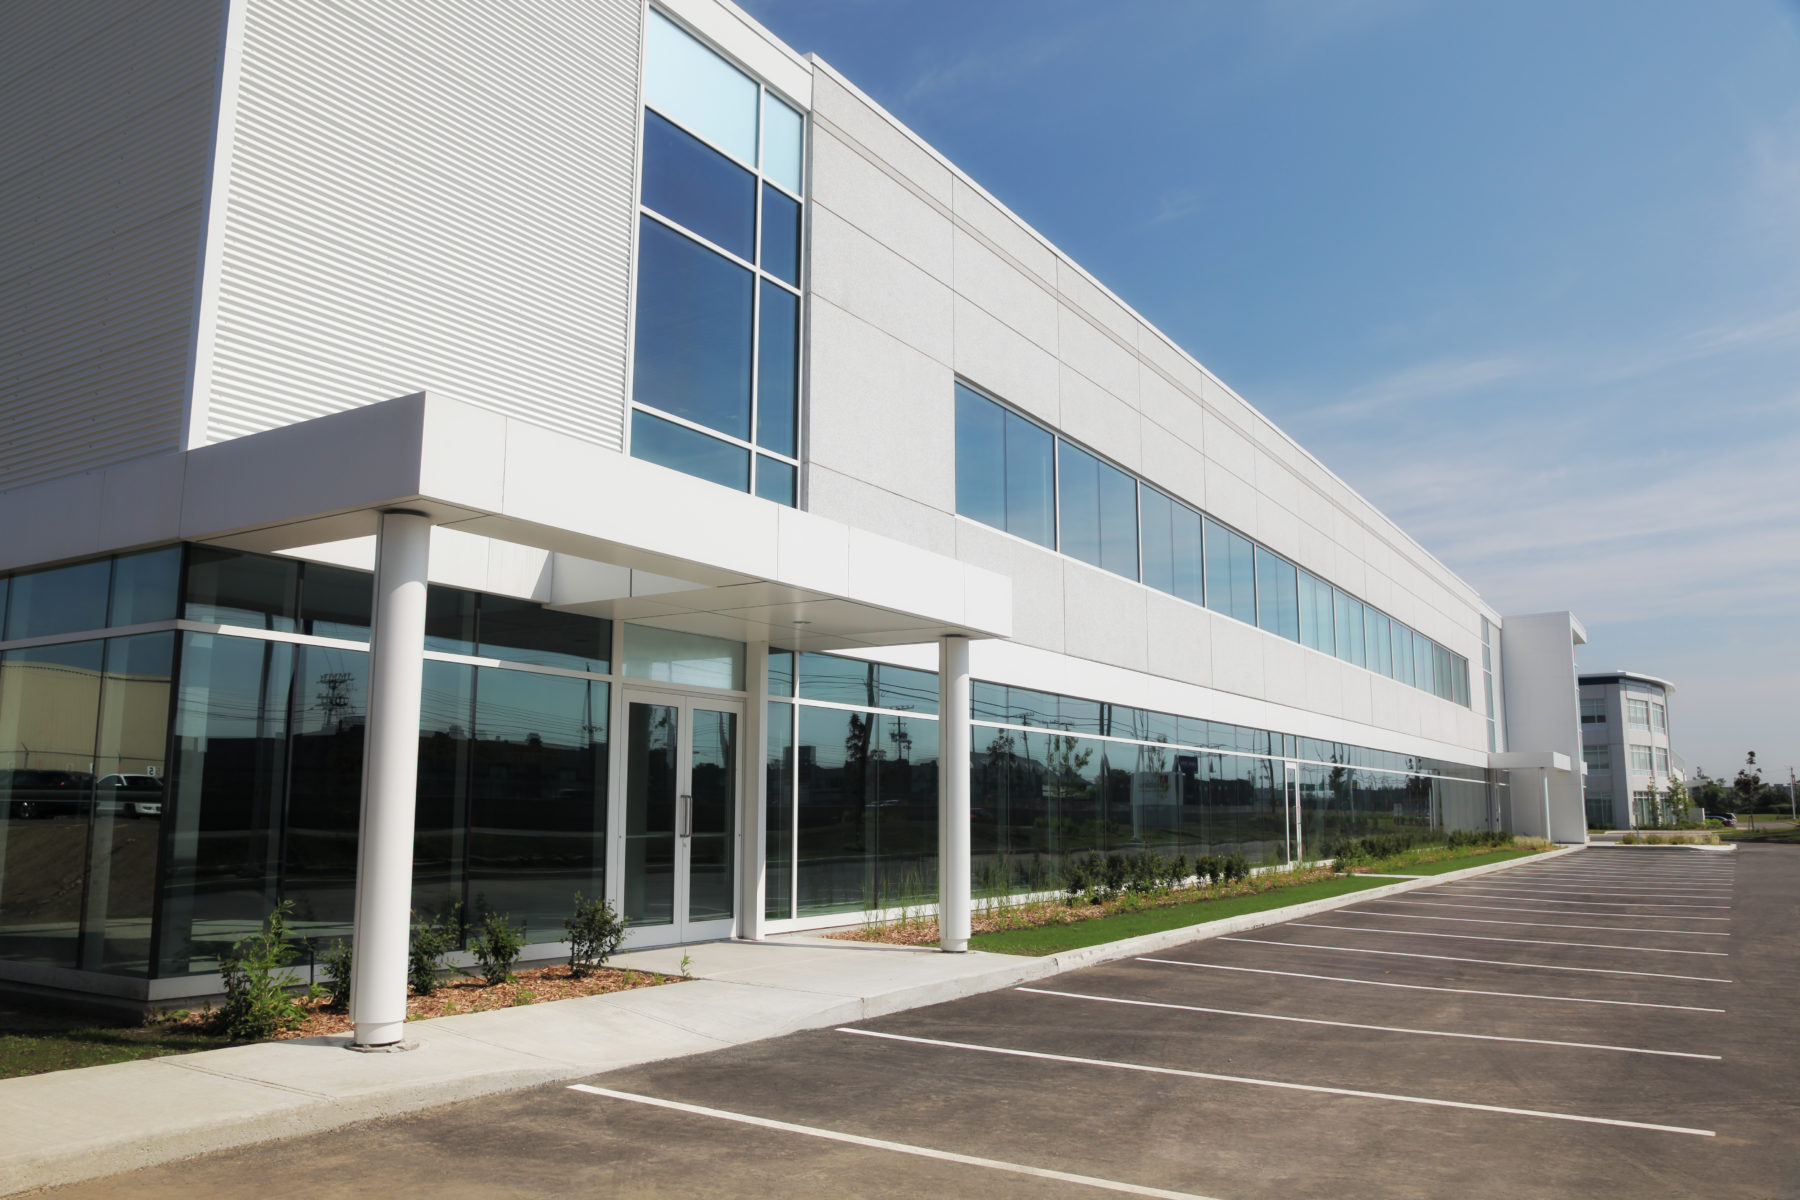 Commercial Building Construction Company in Houston Texas